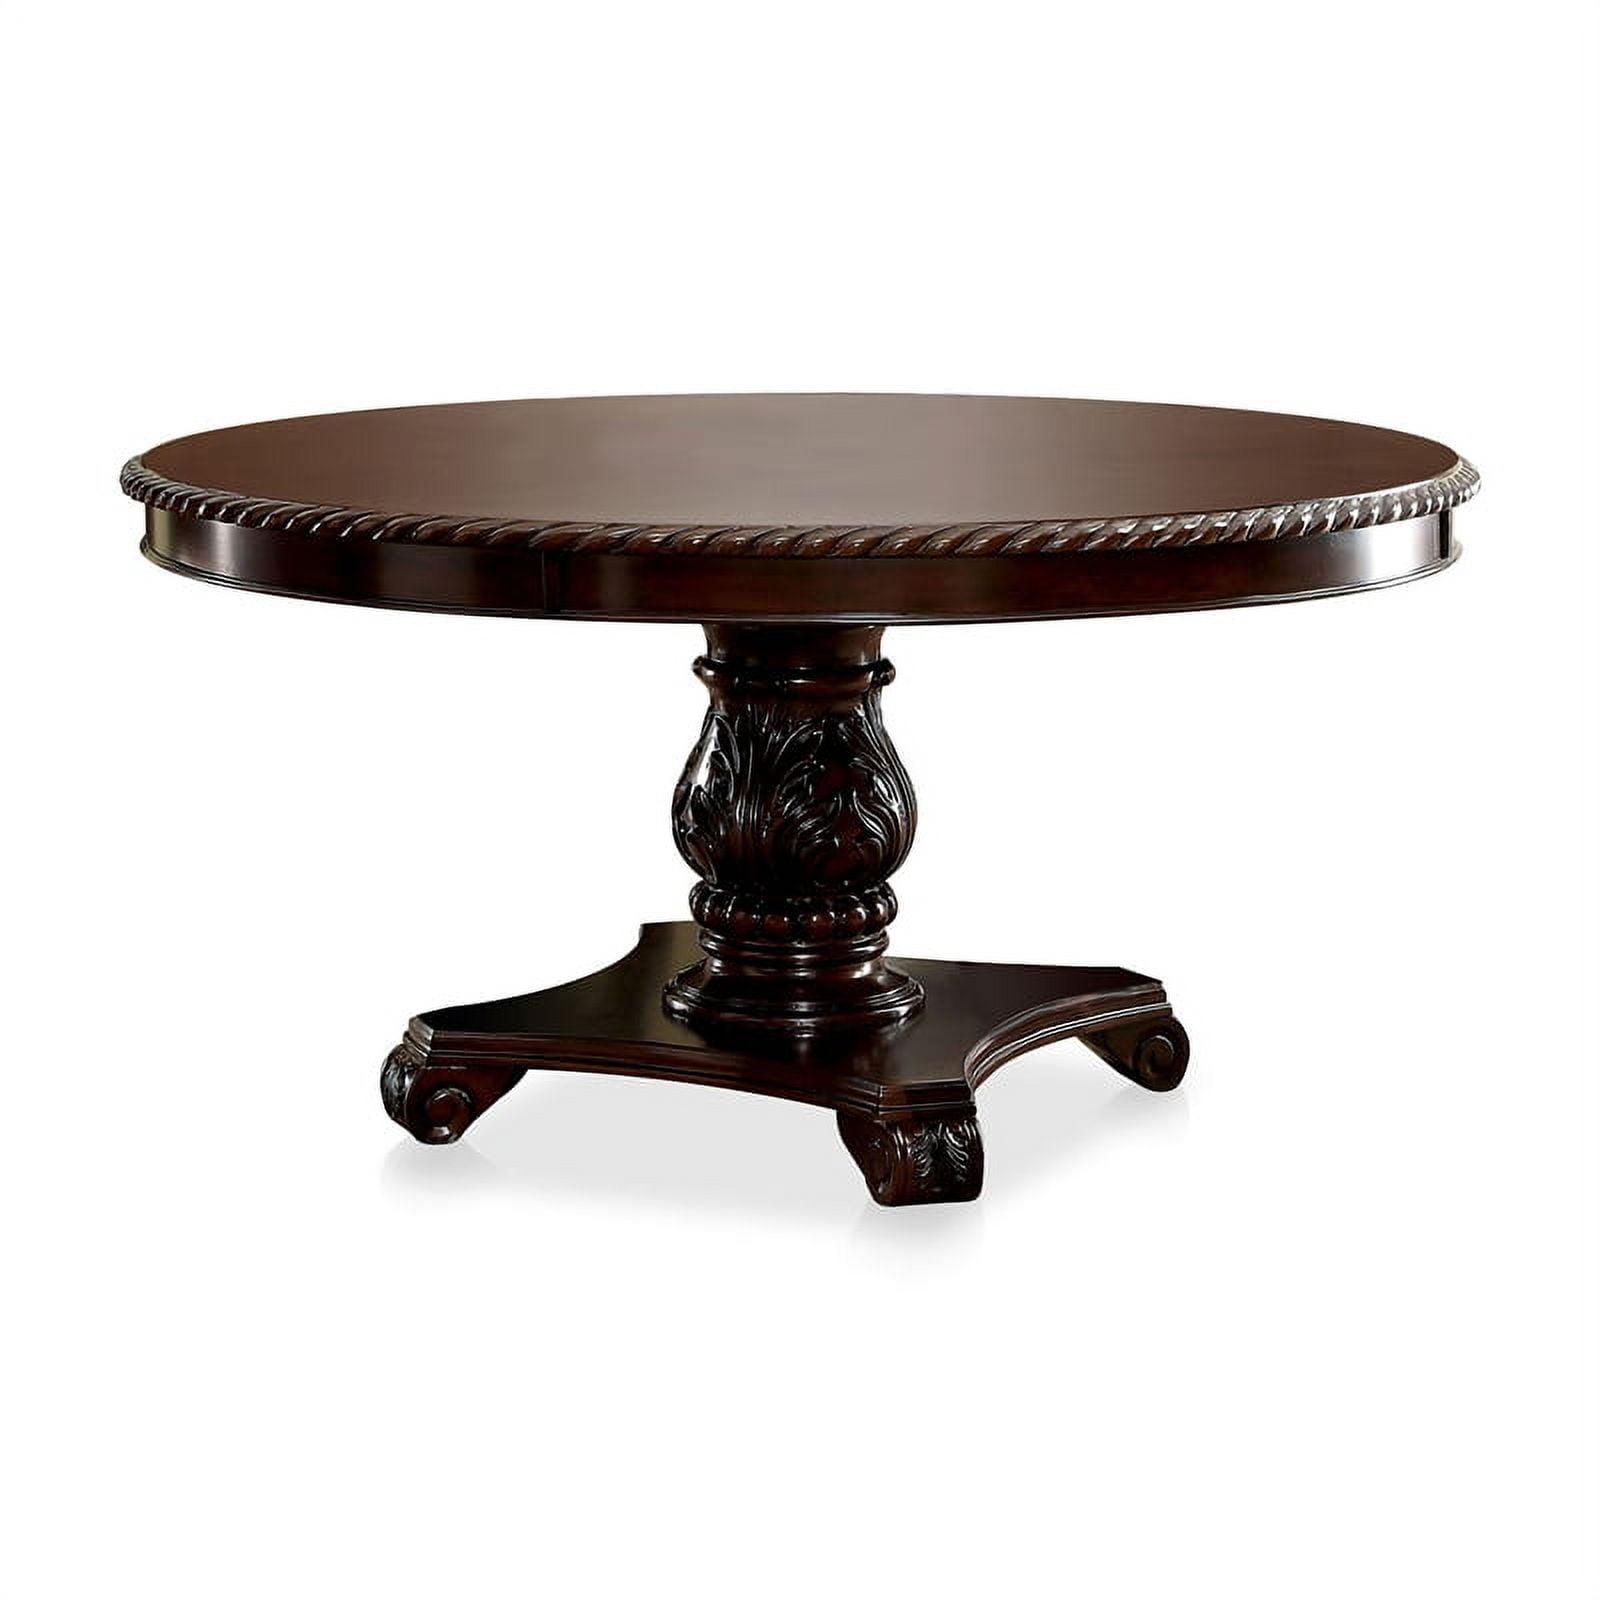 Elegant Carved Wood Round Dining Table in Brown Cherry